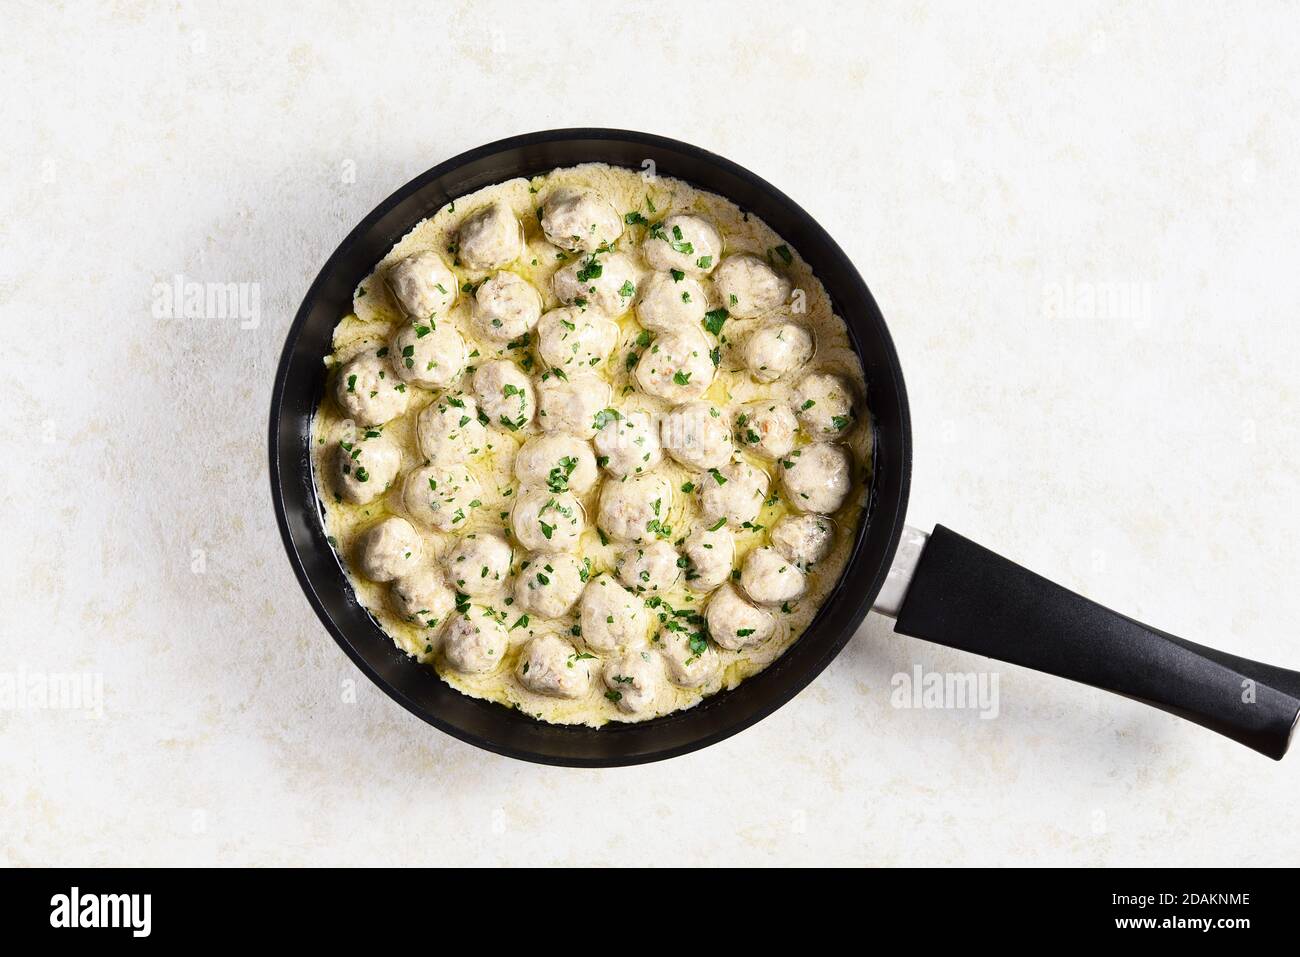 Close up of swedish meatballs with creamy white sauce in frying pan over light stone background with copy space. Top view, flat lay Stock Photo